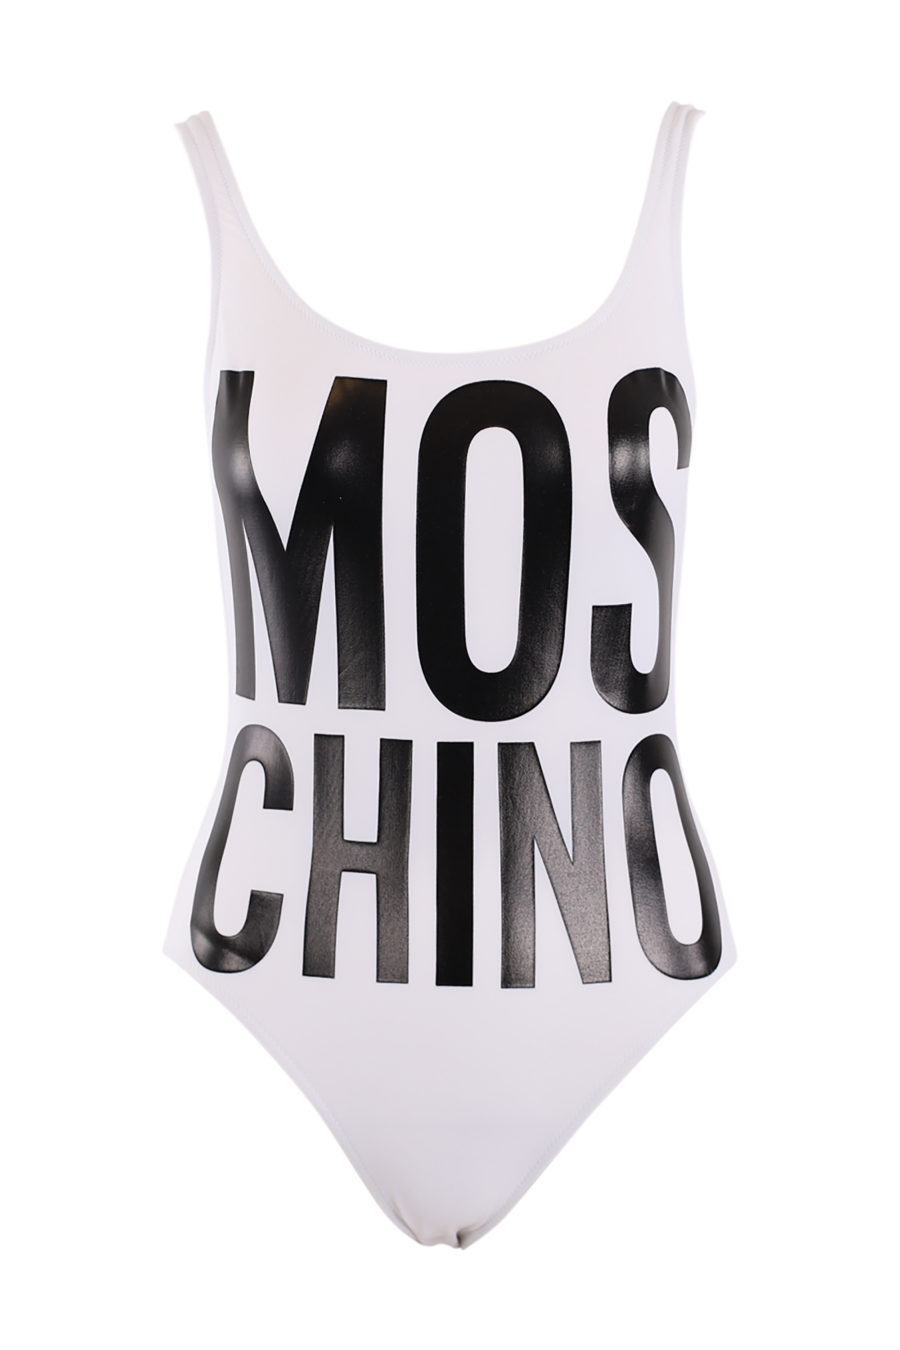 White one-piece swimming costume with large black logo - IMG 9065